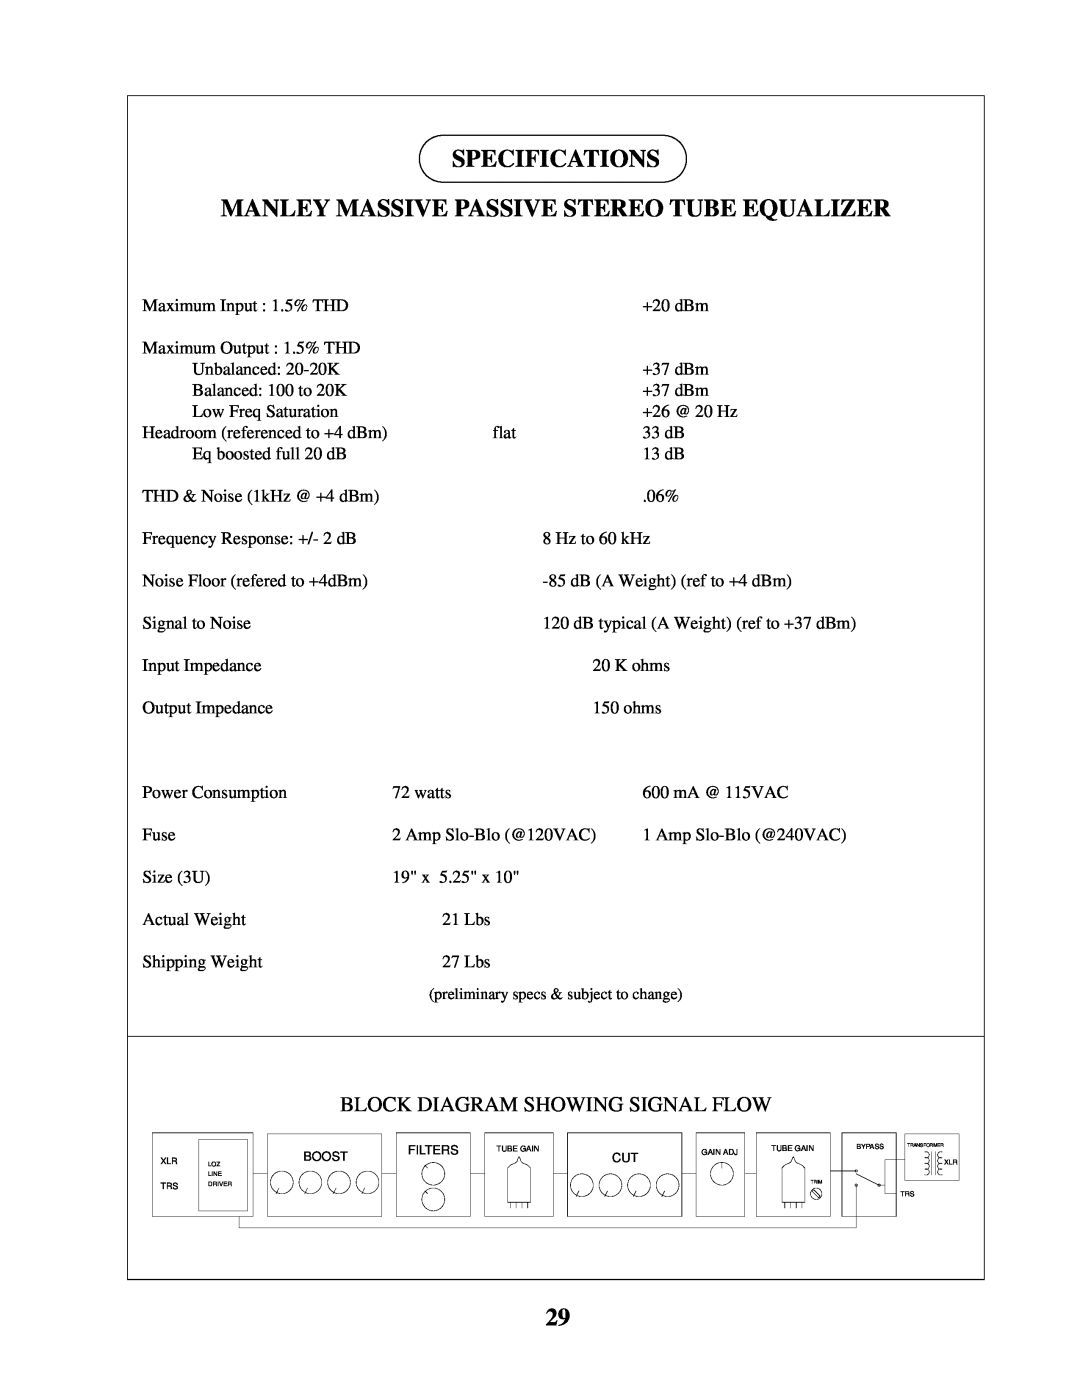 Manley Labs Manley Massive Passive Stereo Tube Equalizer owner manual Specifications, Block Diagram Showing Signal Flow 